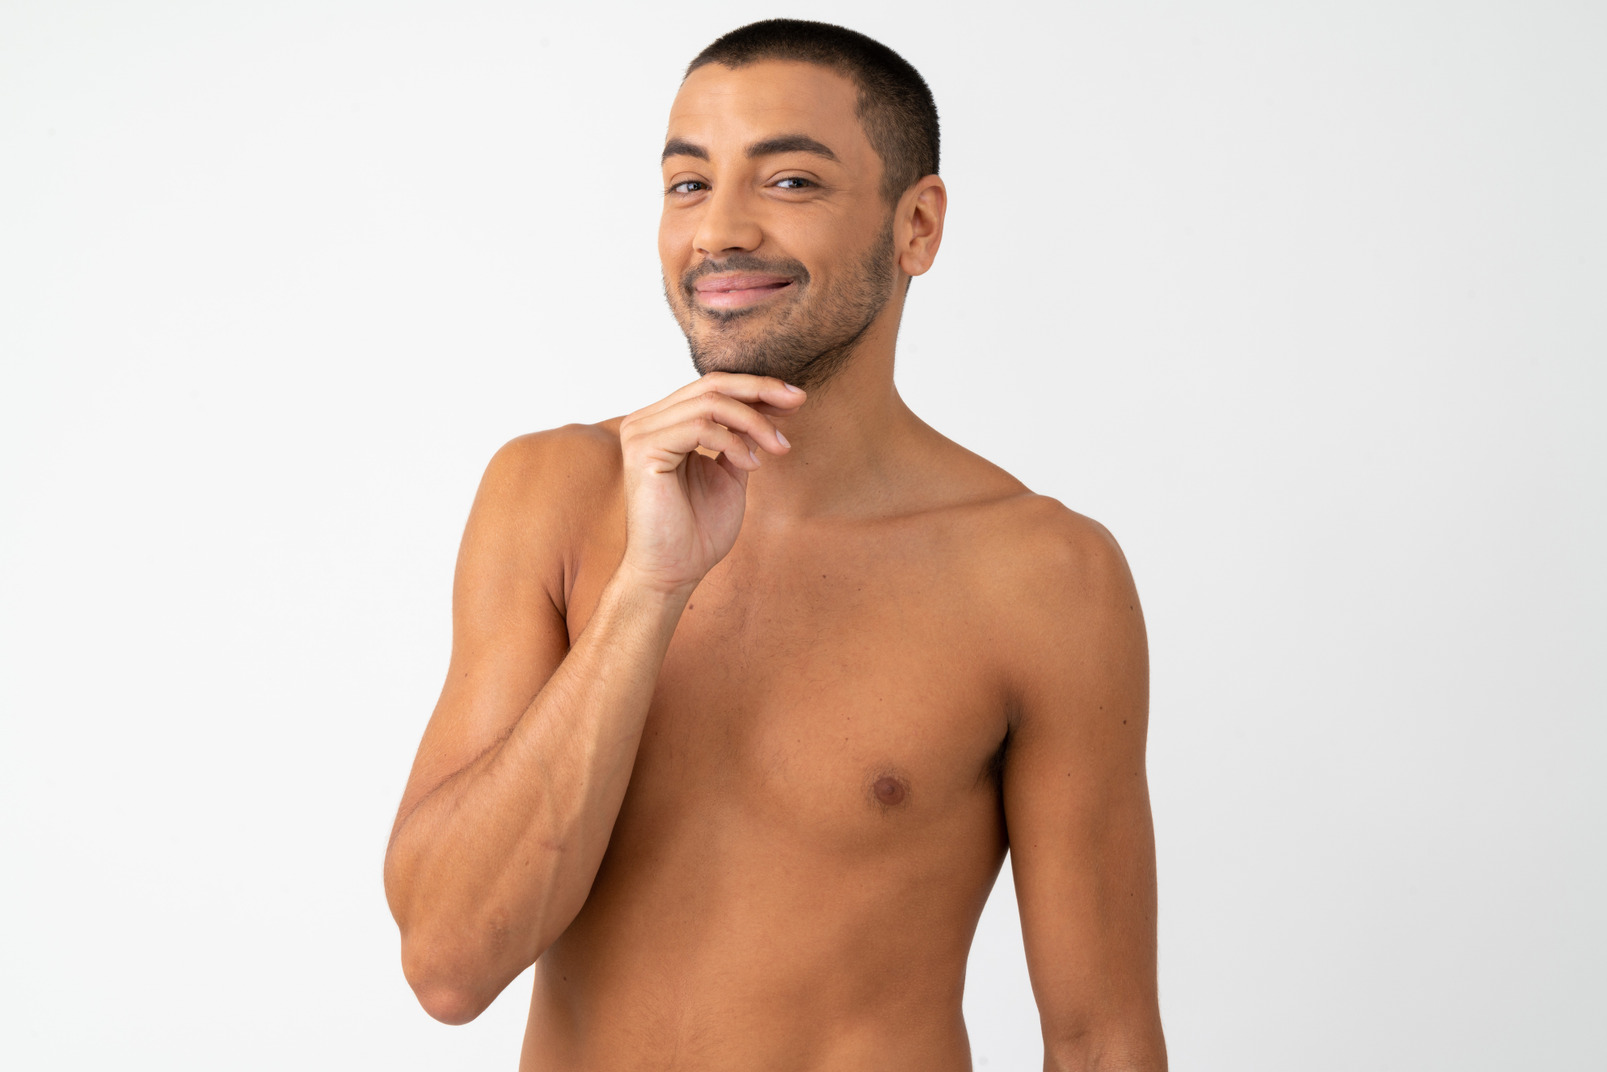 Barechested man slightly smiling and touching his chin with a hand